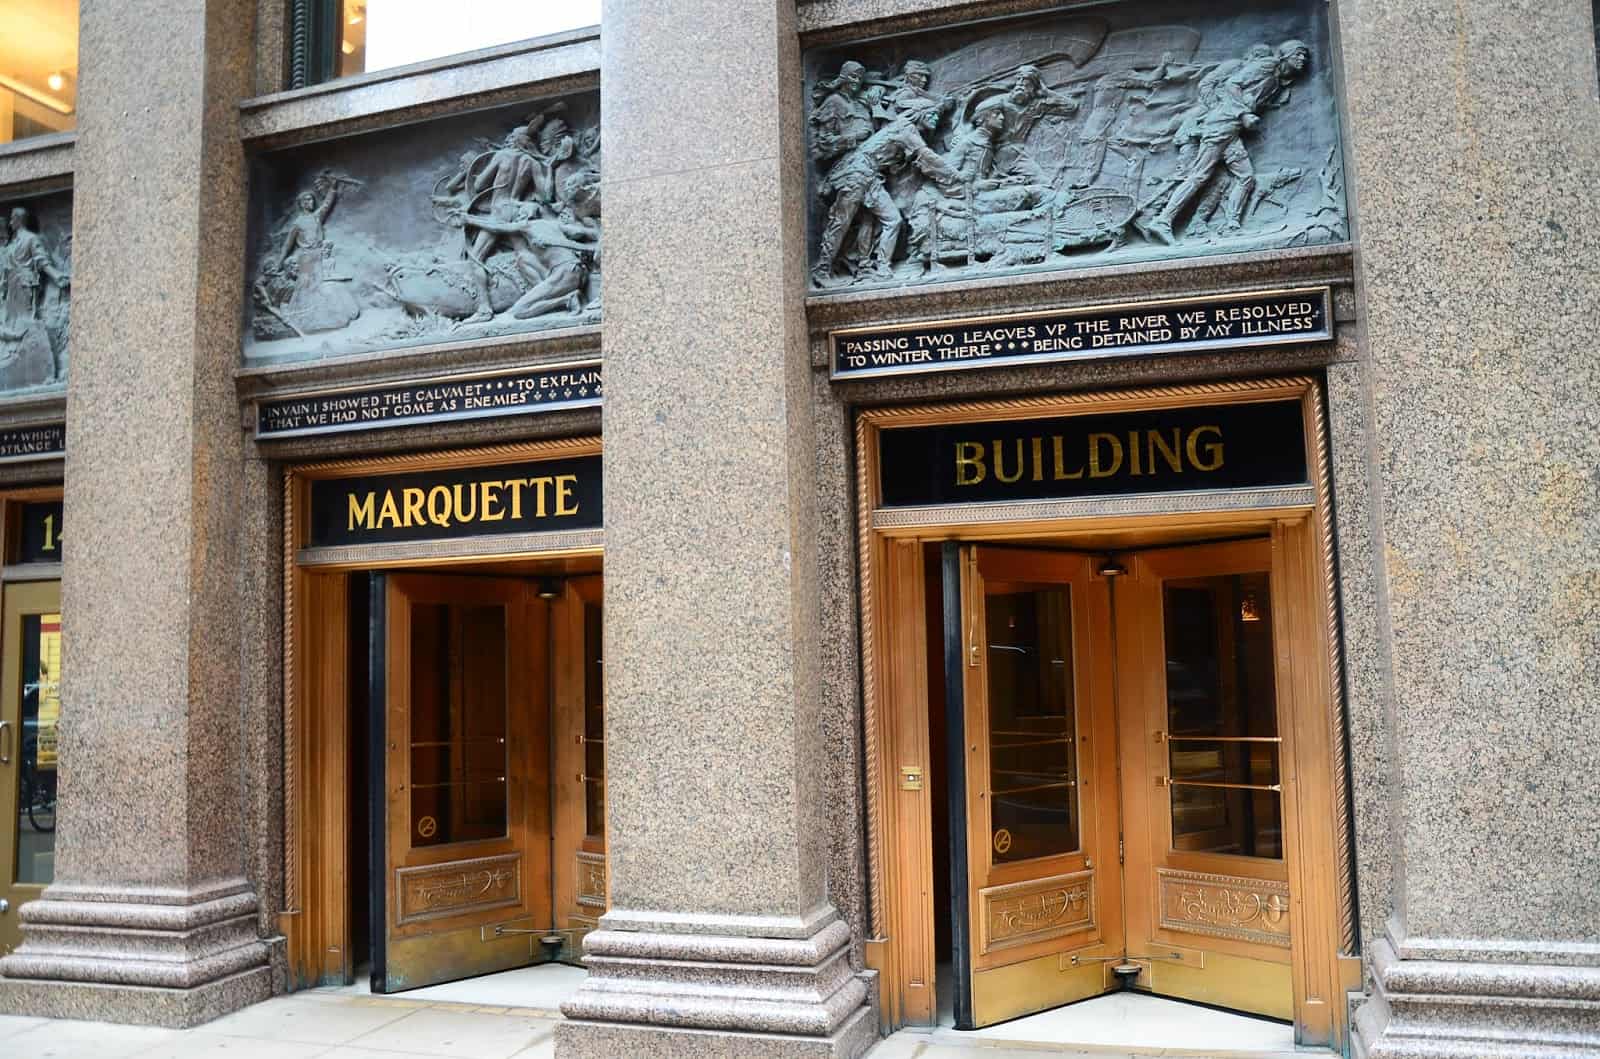 Entrance to the Marquette Building in Chicago